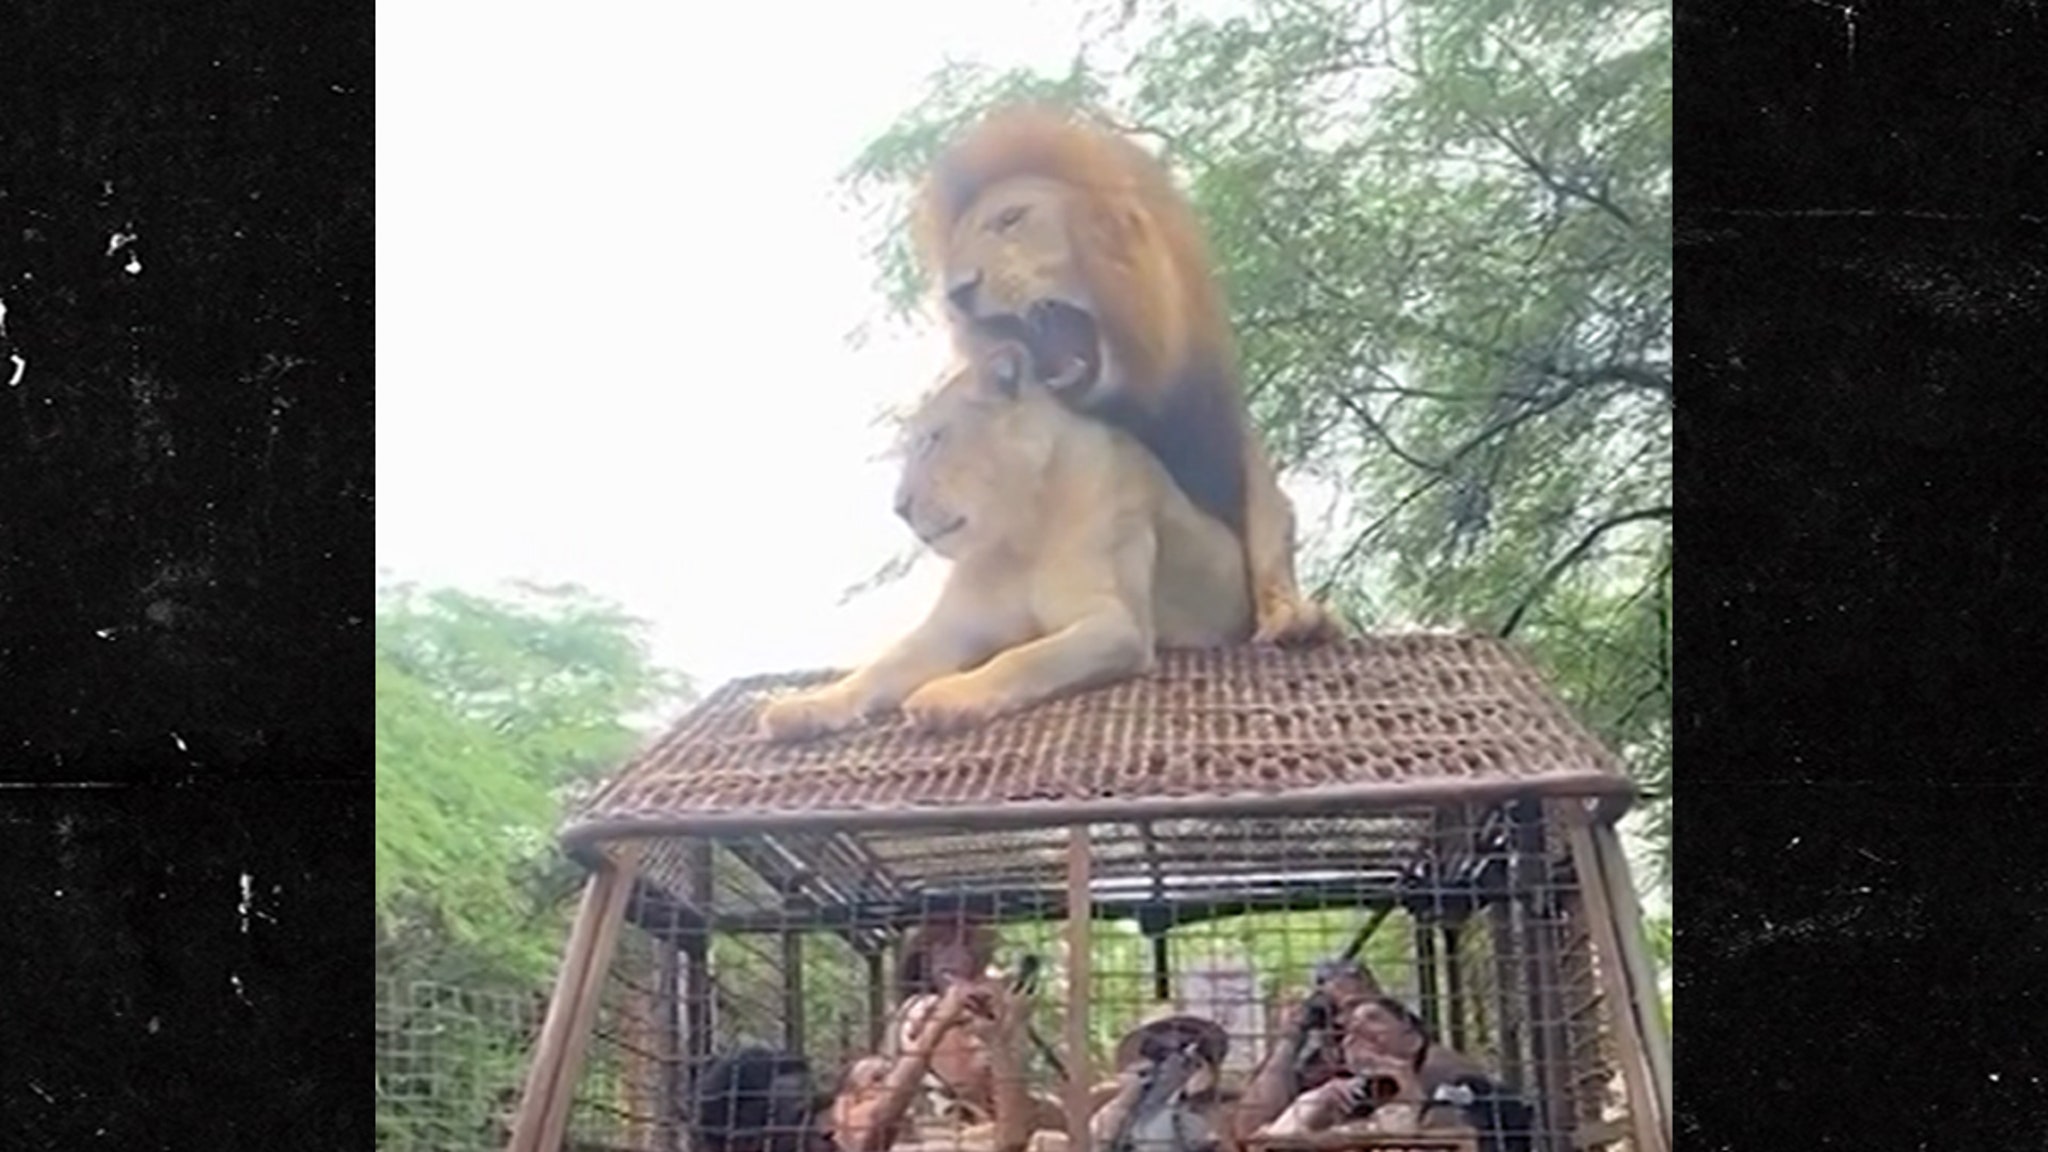 Lions Have Sex on Top of Safari Truck Full of People, Wild Video